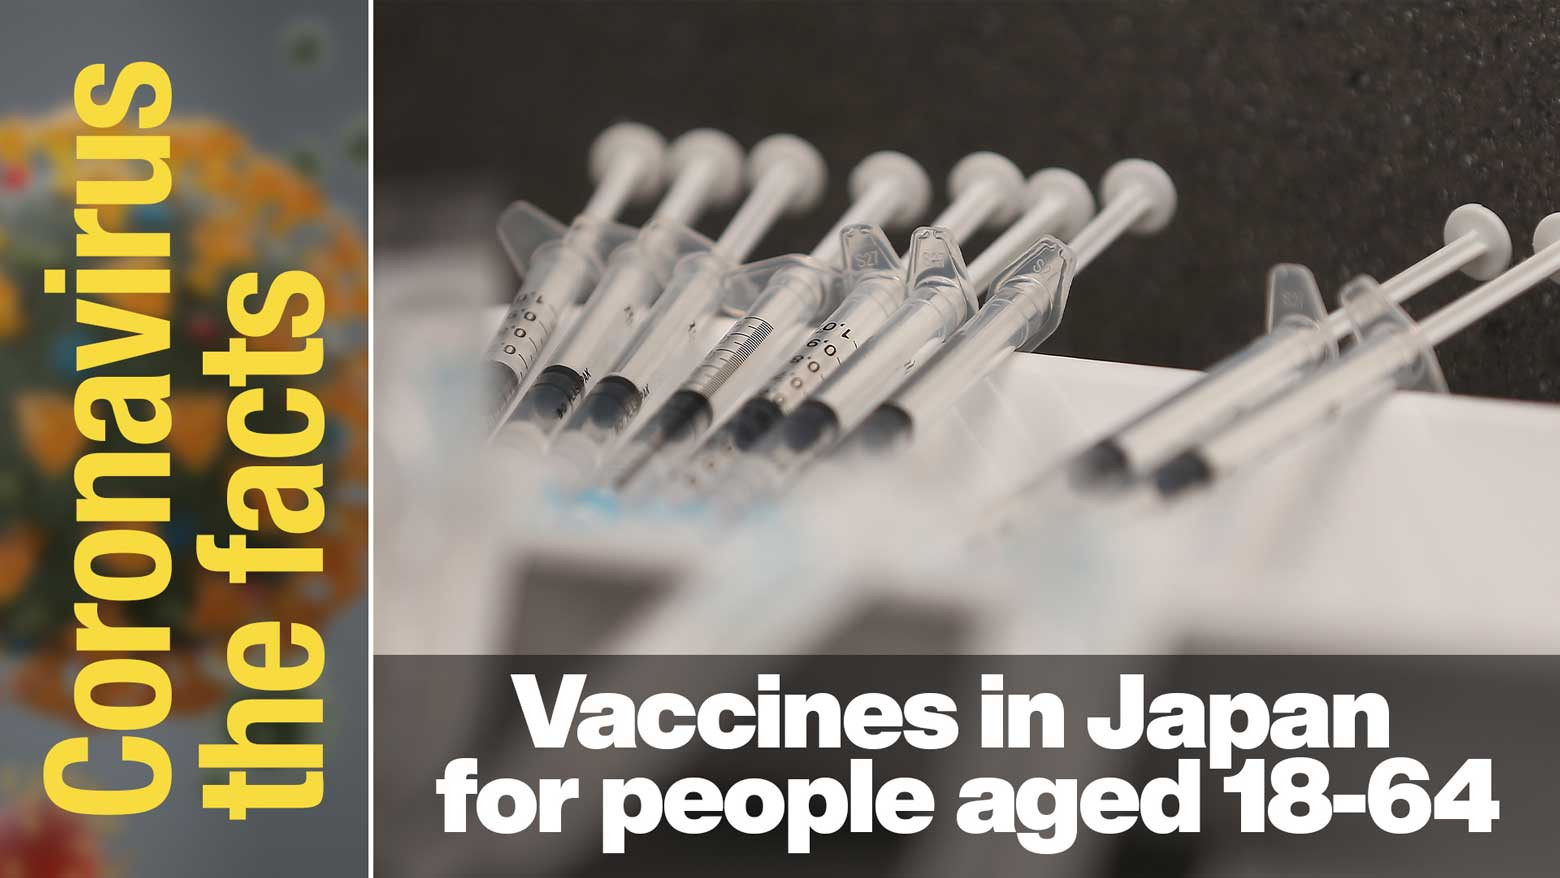 State-run vaccination centers open to people aged 18 to 64